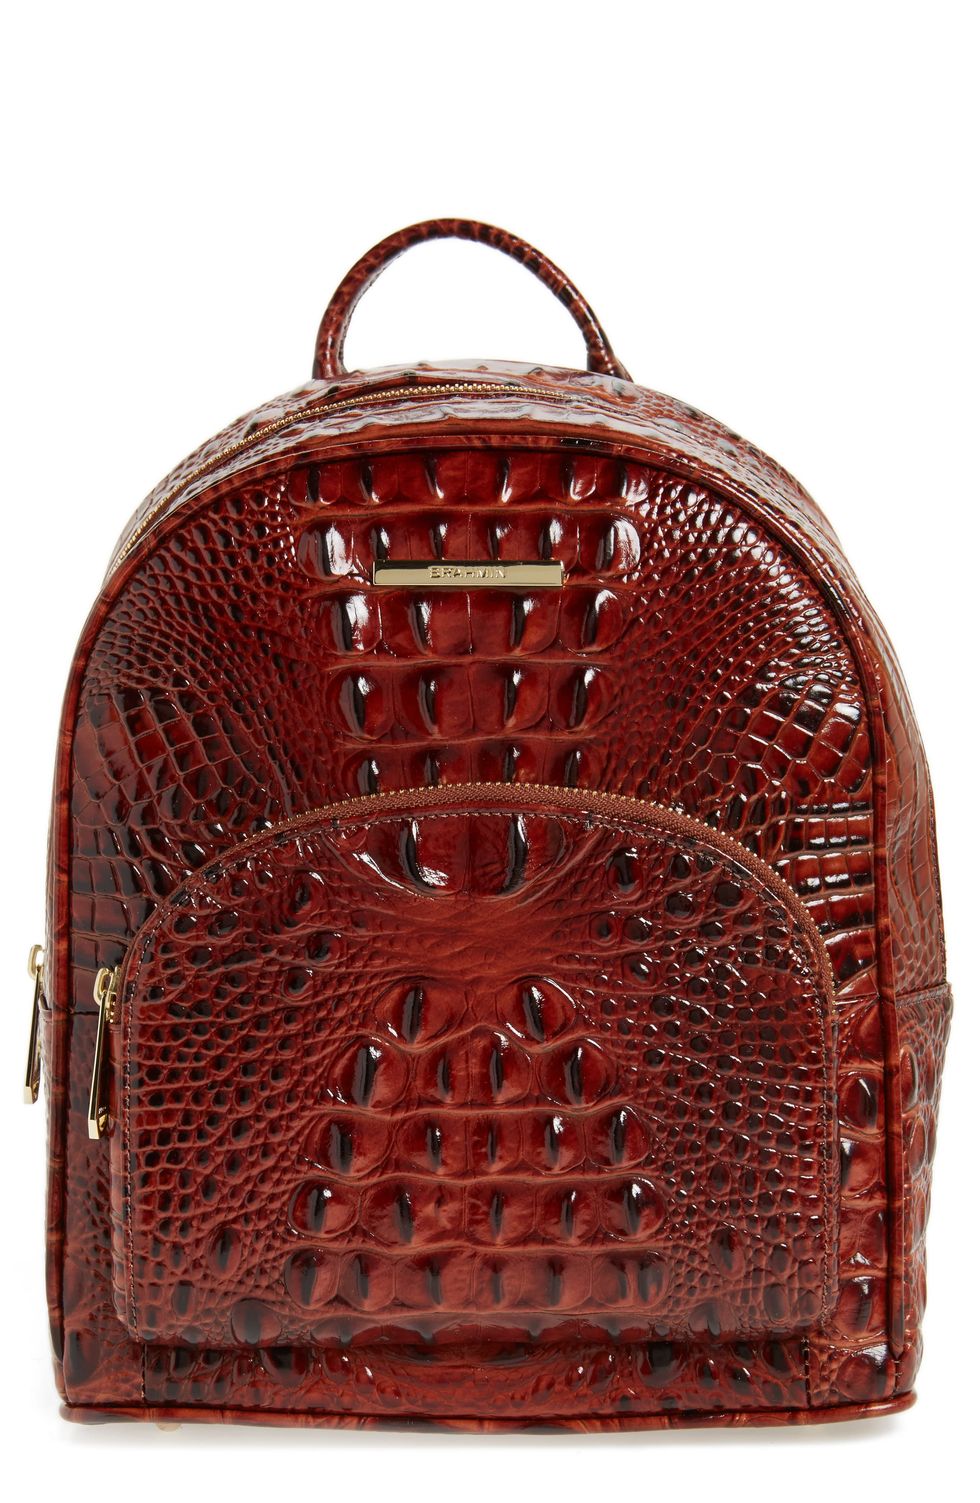 Fashionable luxury backpack for women REF: 16052